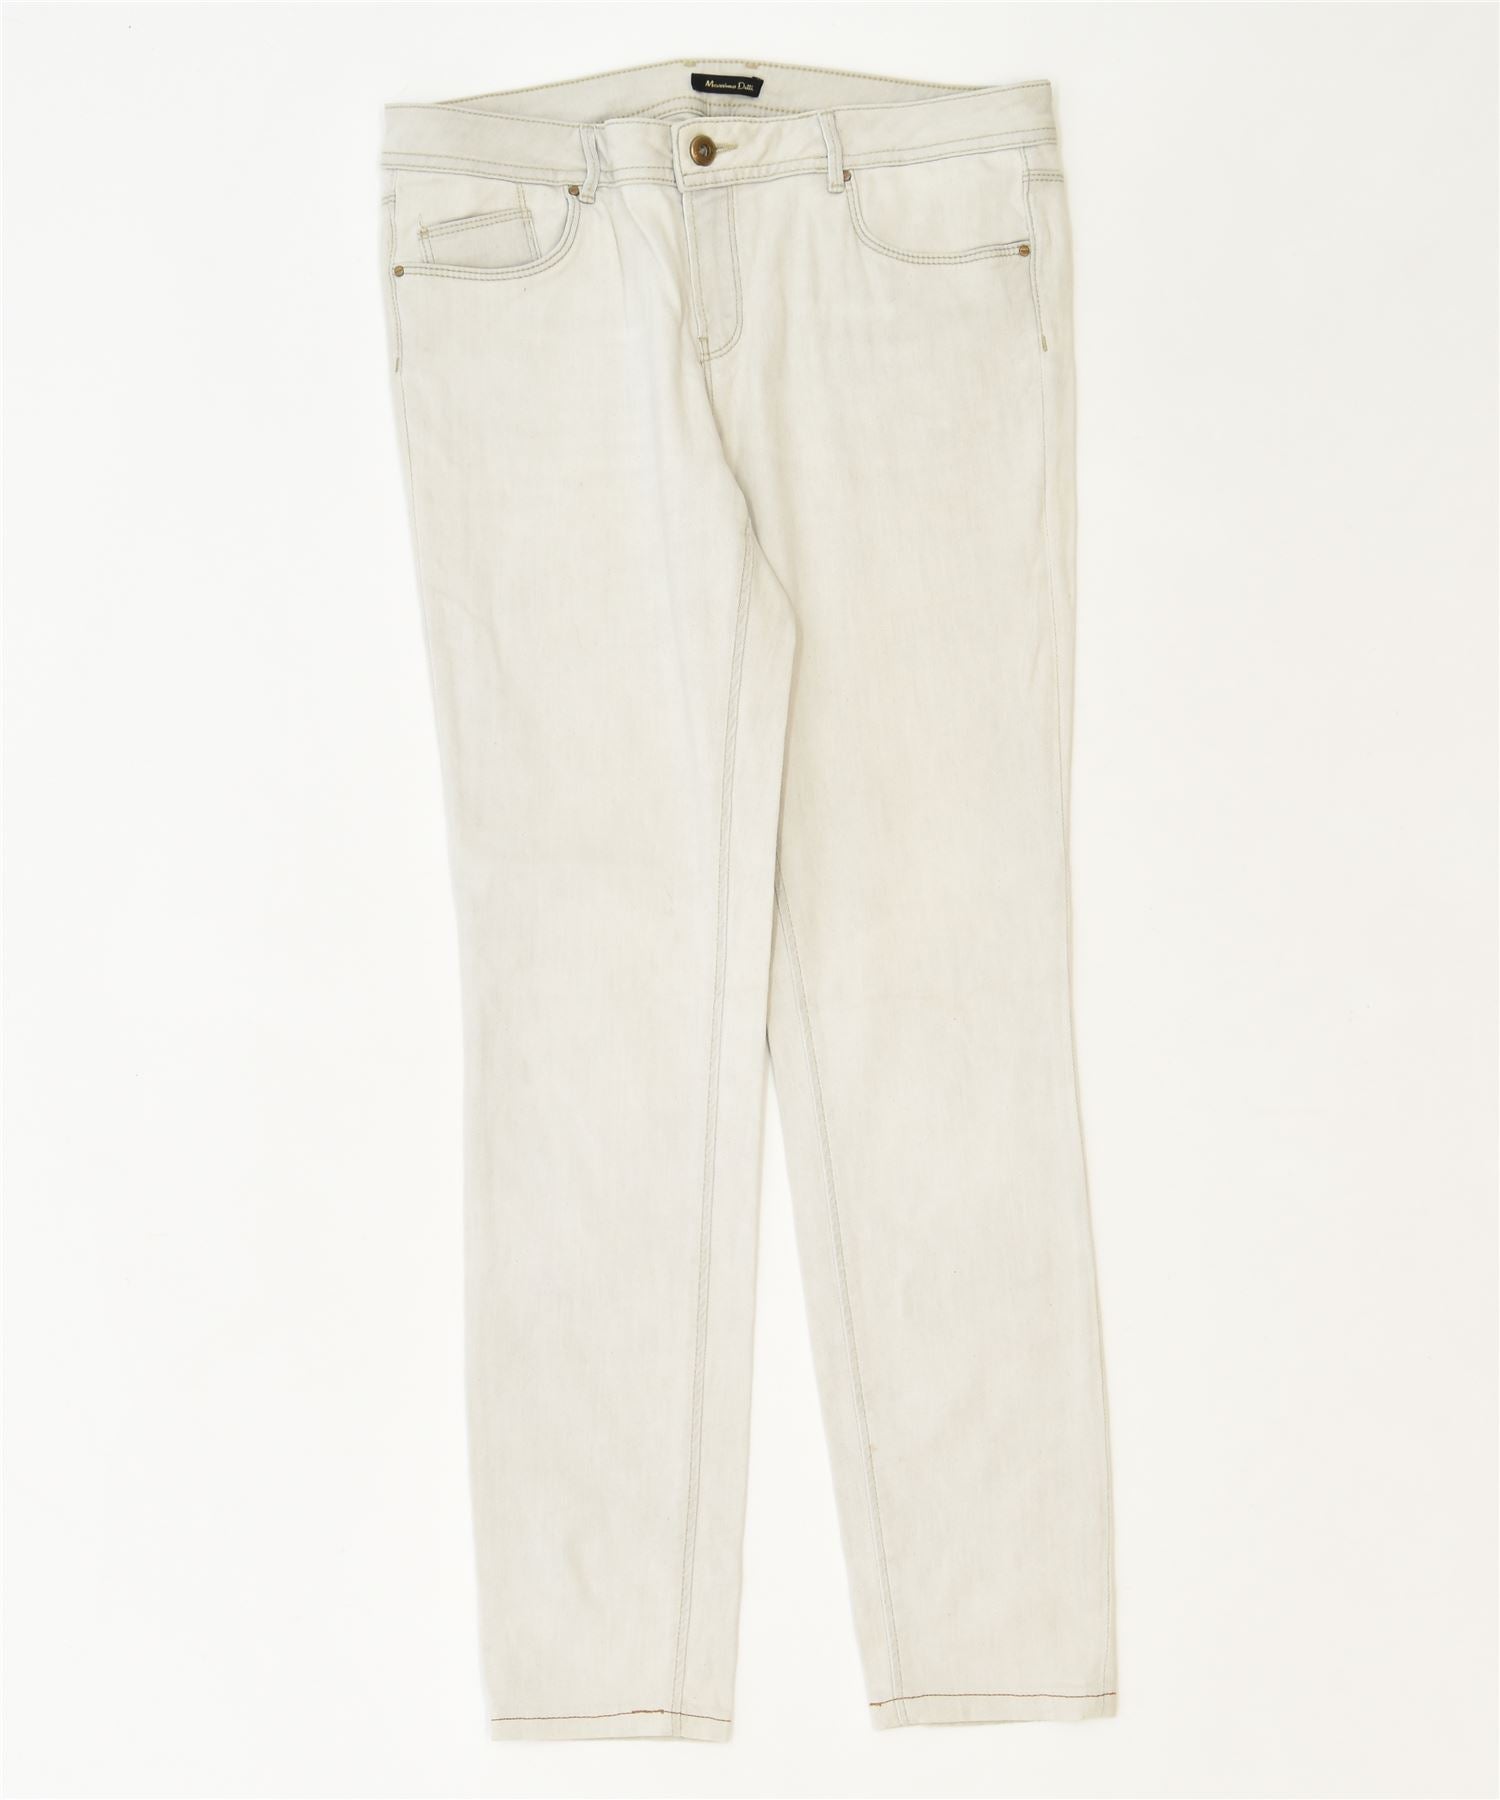 American Eagle Womens White Jegging Jeans Size